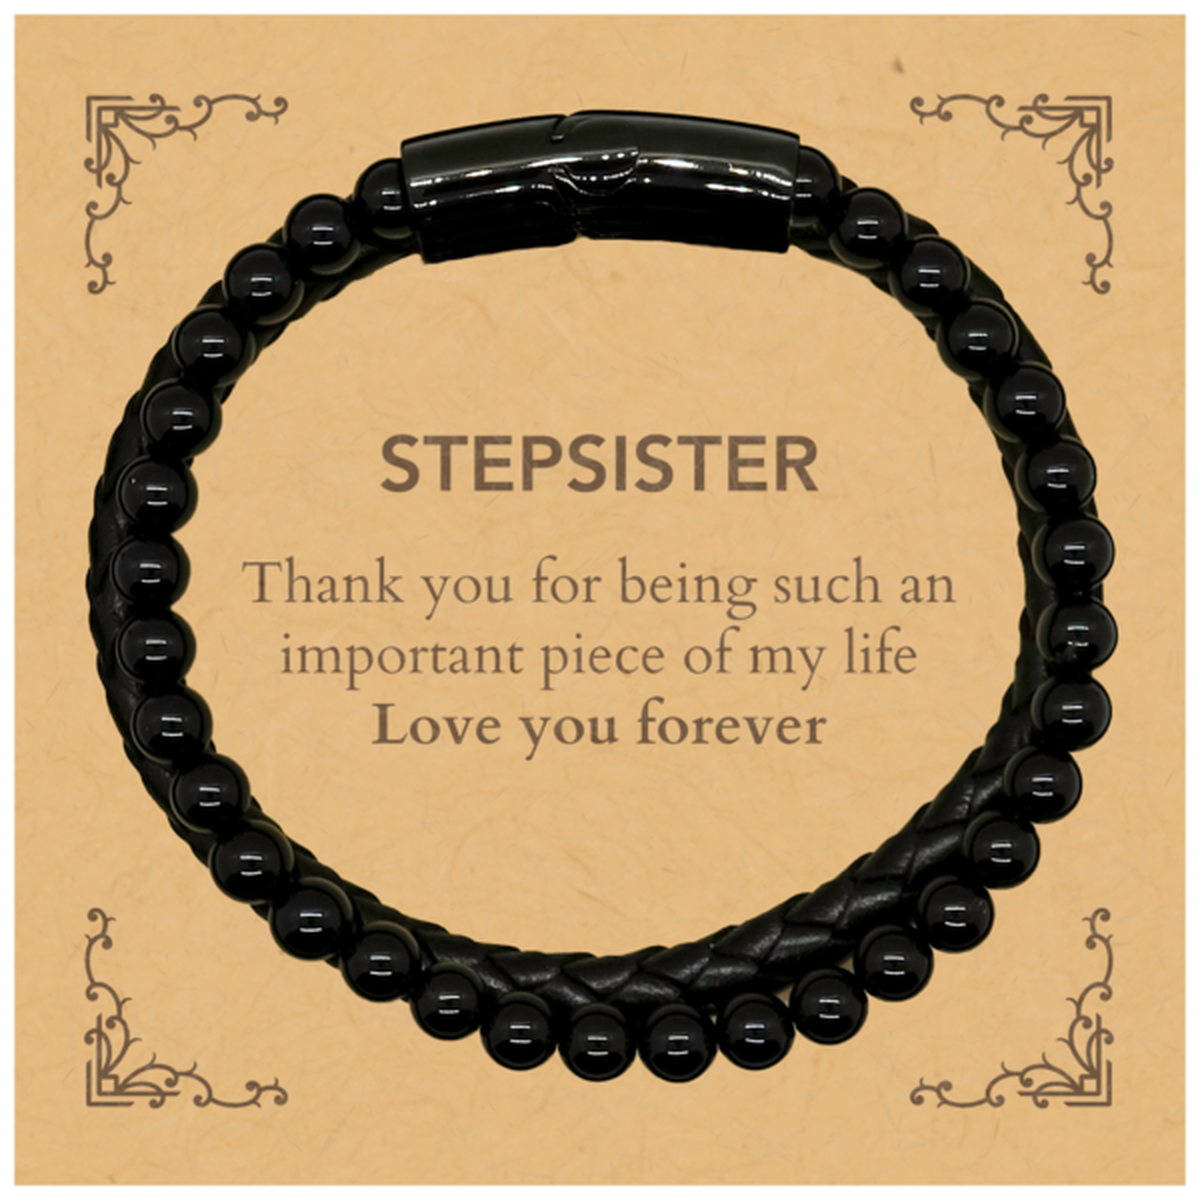 Appropriate Stepsister Stone Leather Bracelets Epic Birthday Gifts for Stepsister Thank you for being such an important piece of my life Stepsister Christmas Mothers Fathers Day